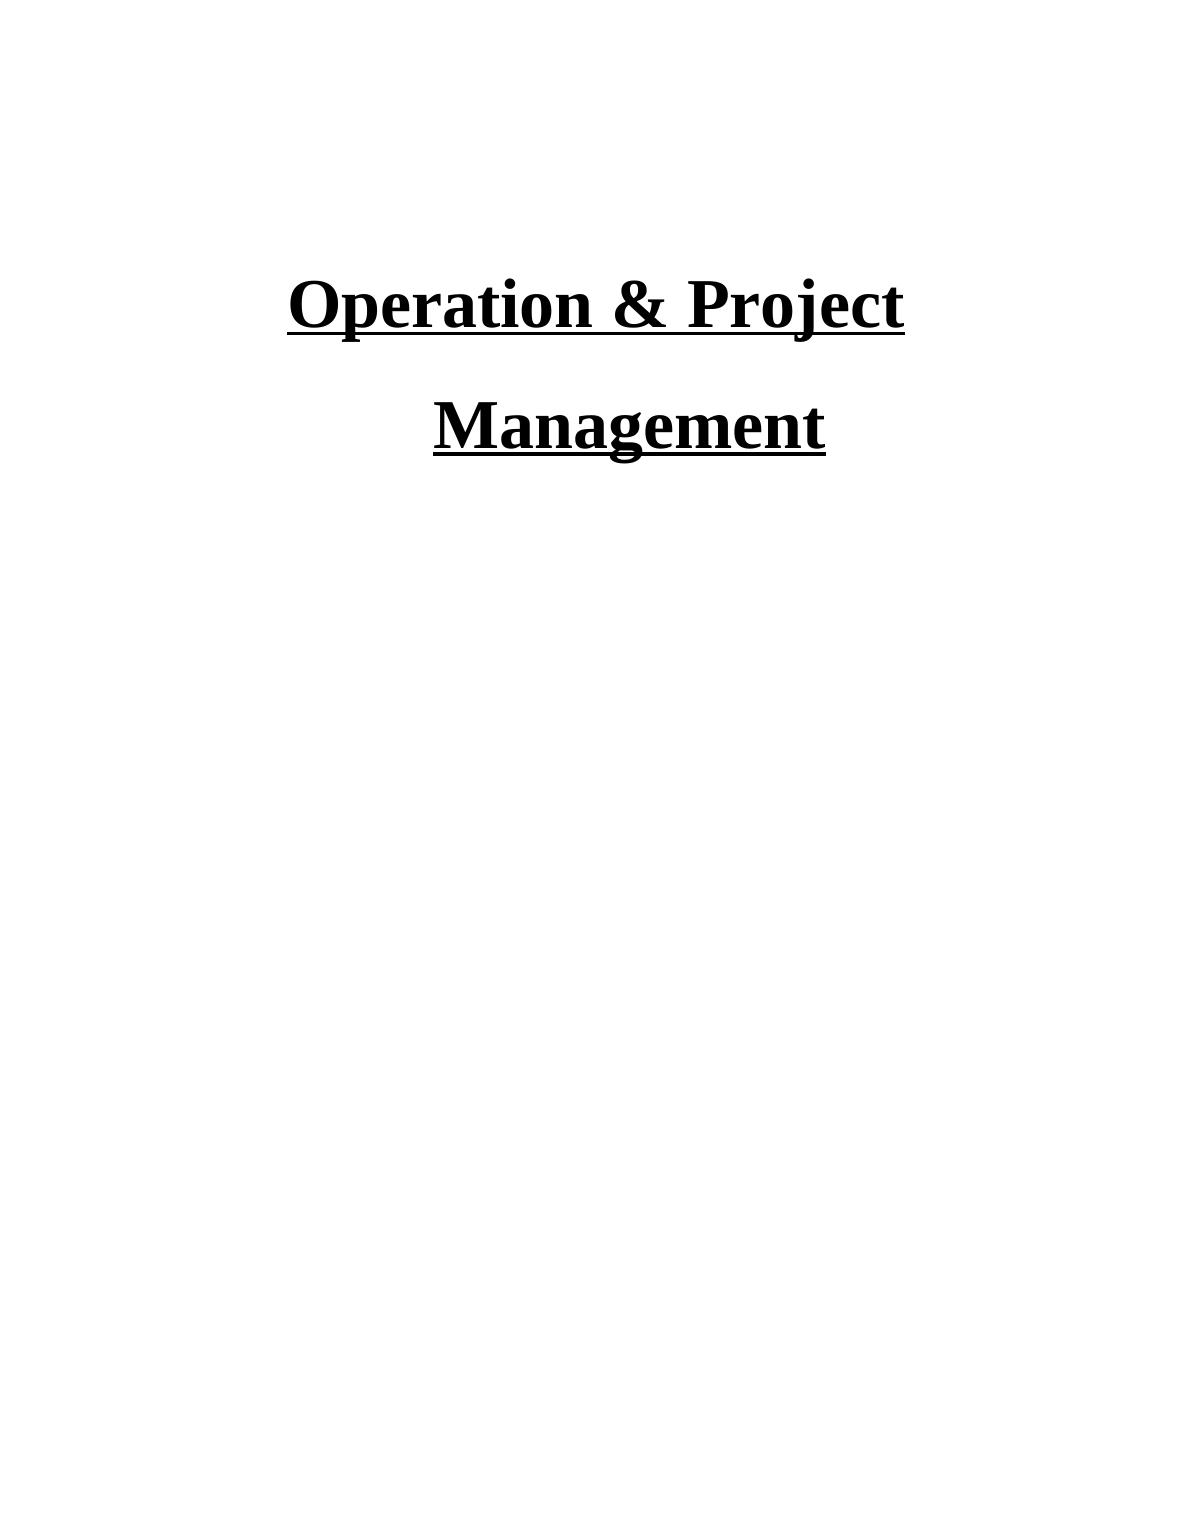 Operation & Project Management INTRODUCTION 1 PART B1 Introduction of the organization_1